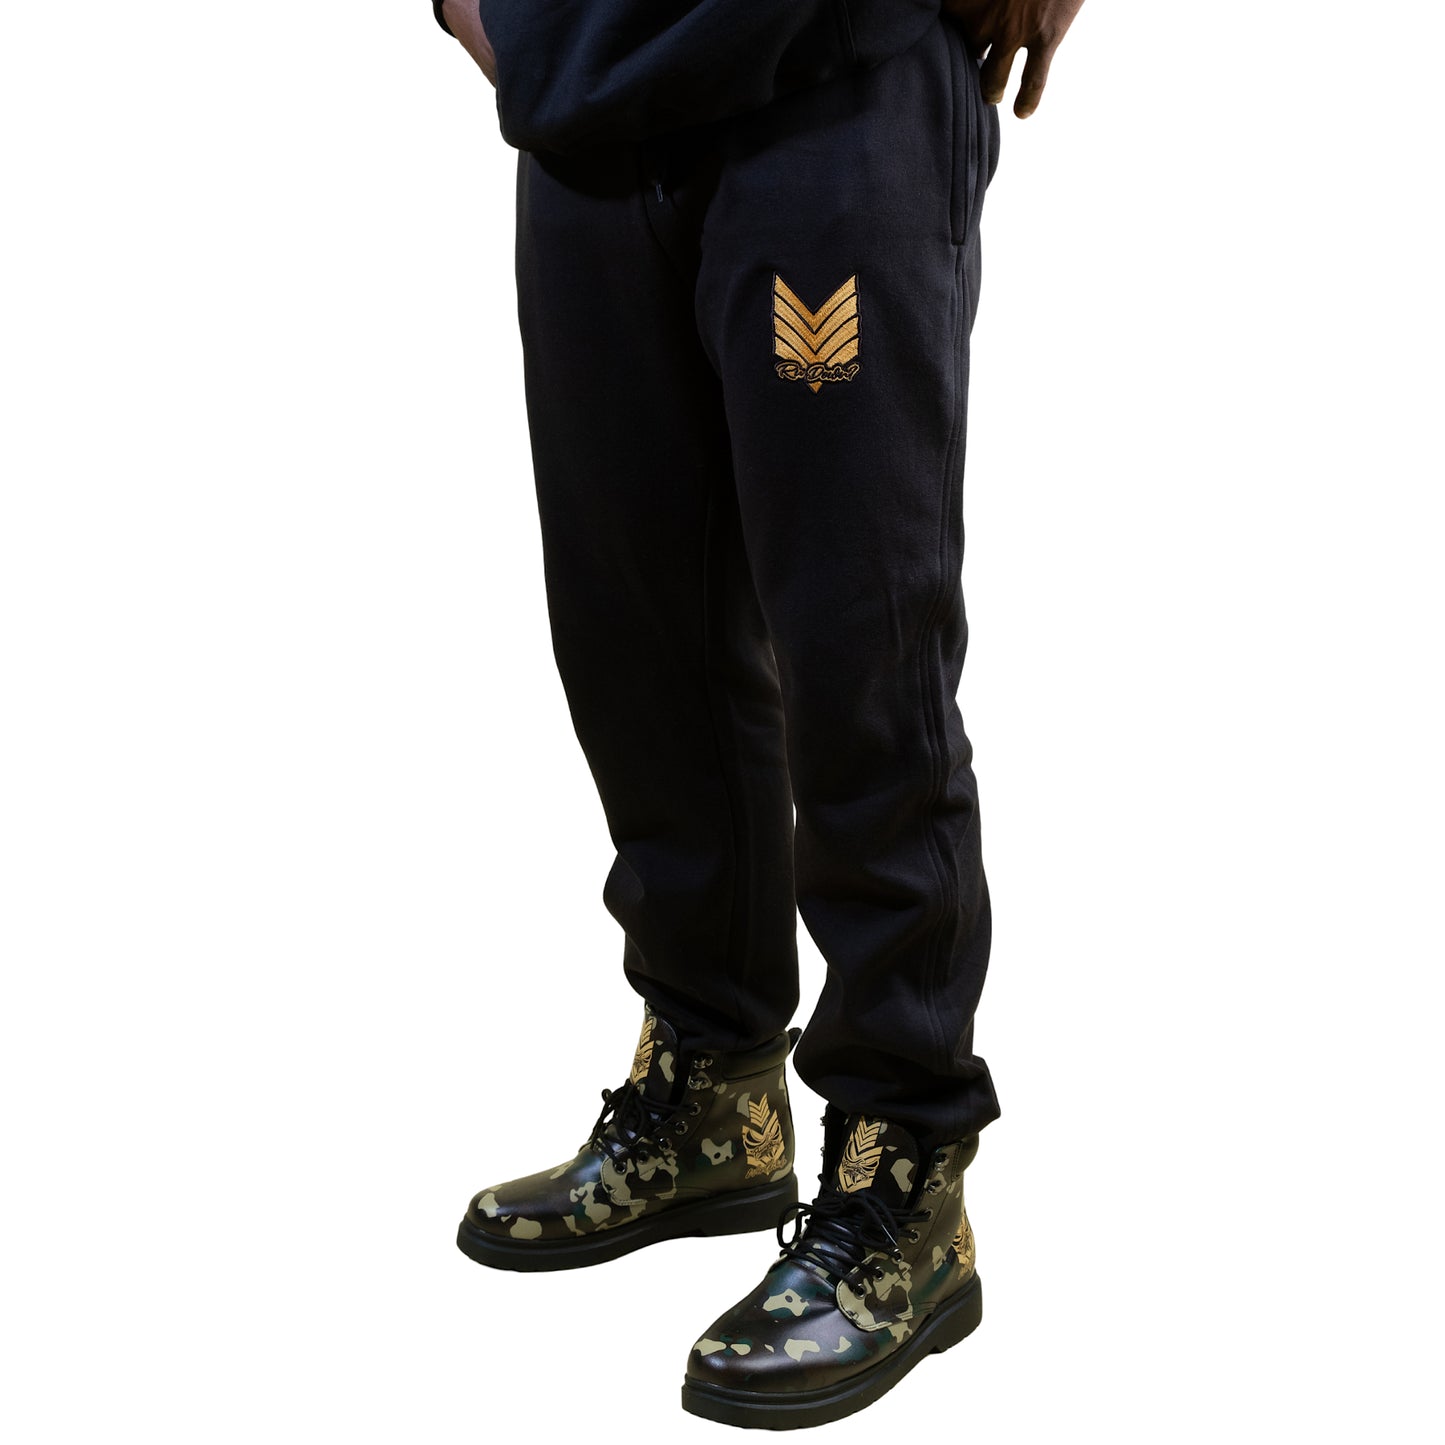 Embroidered Unisex Joggers " RU Down? " - PEACE GANG